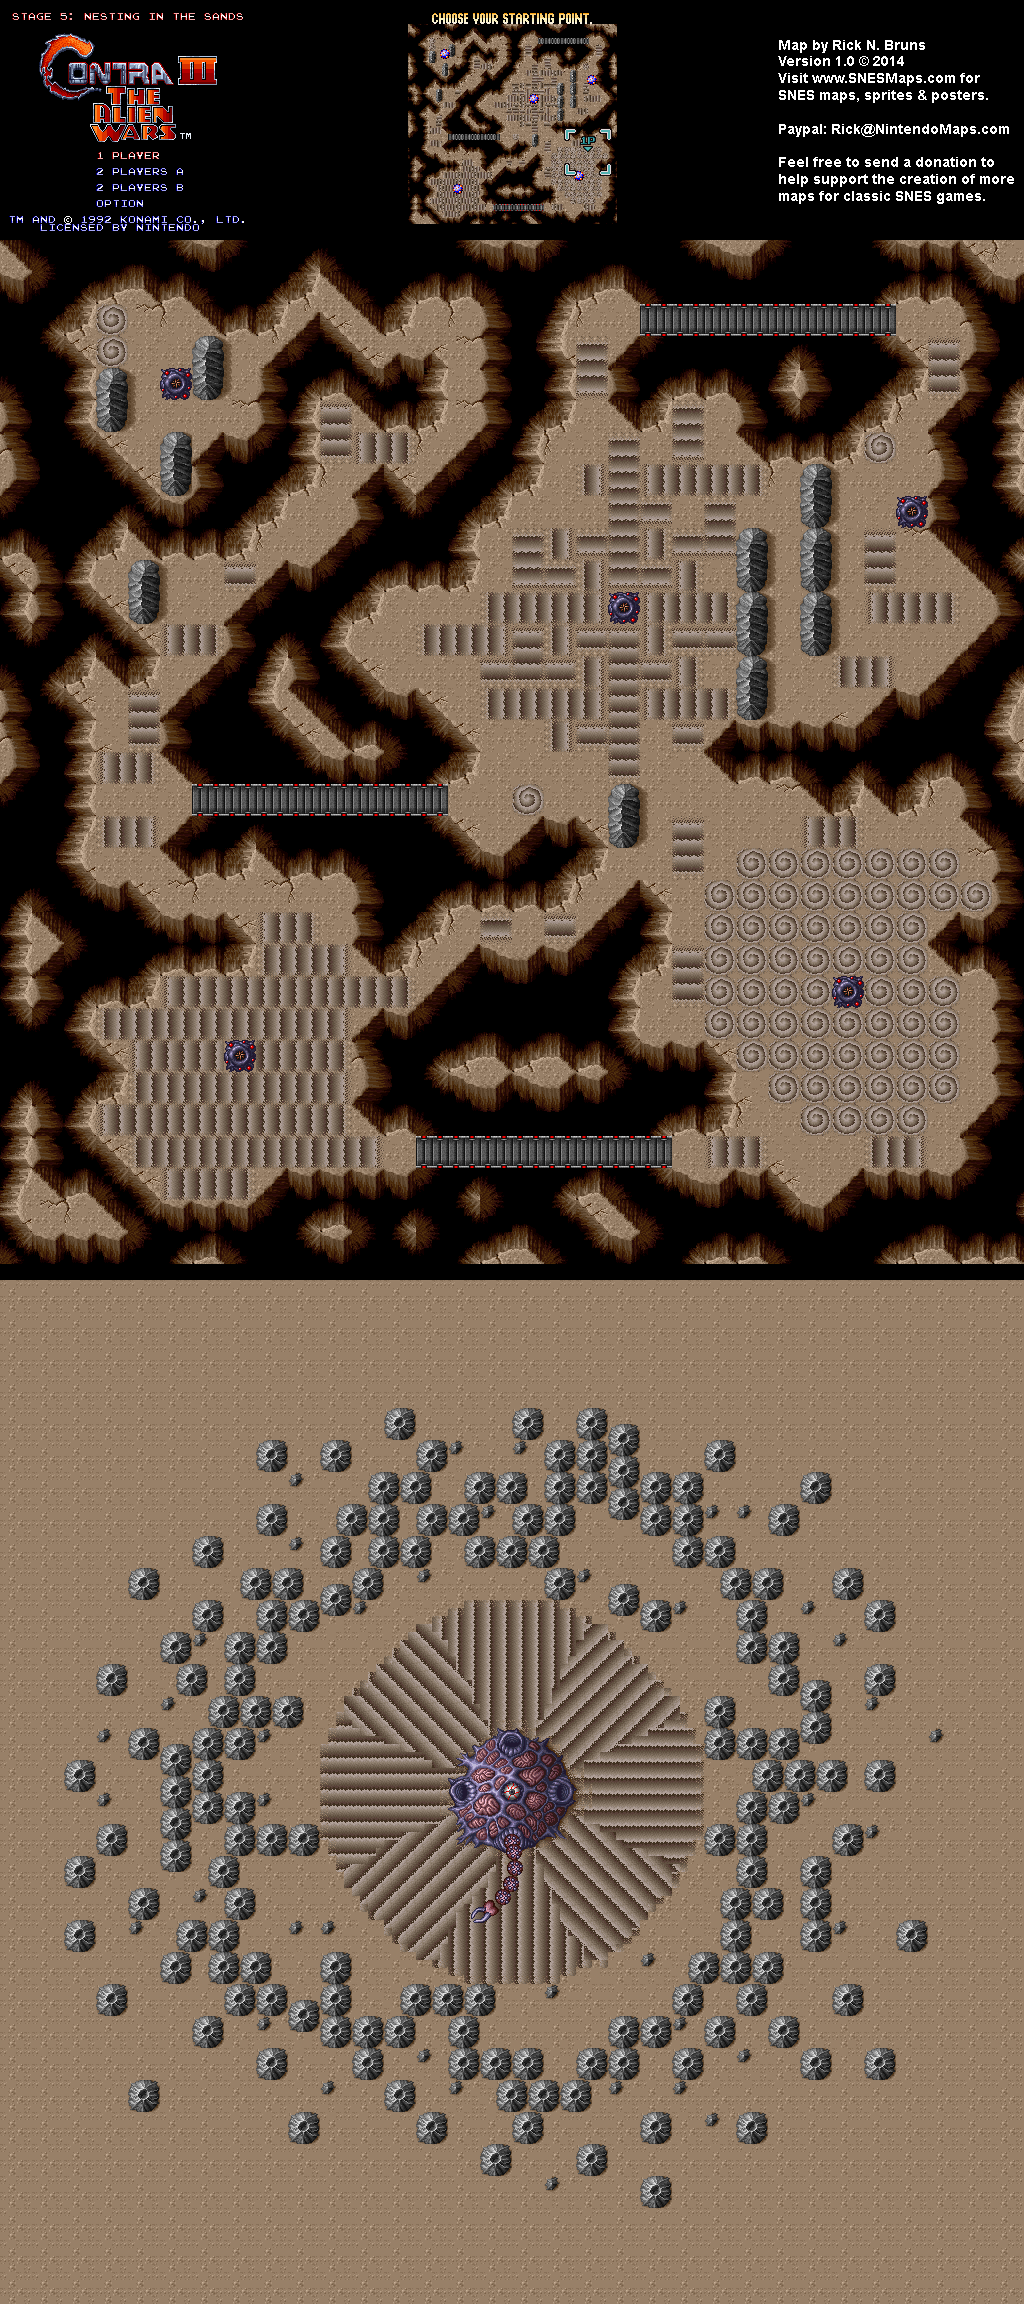 Contra 3: The Alien Wars - Stagel 5 Nesting in the Sands - Super Nintendo SNES Map